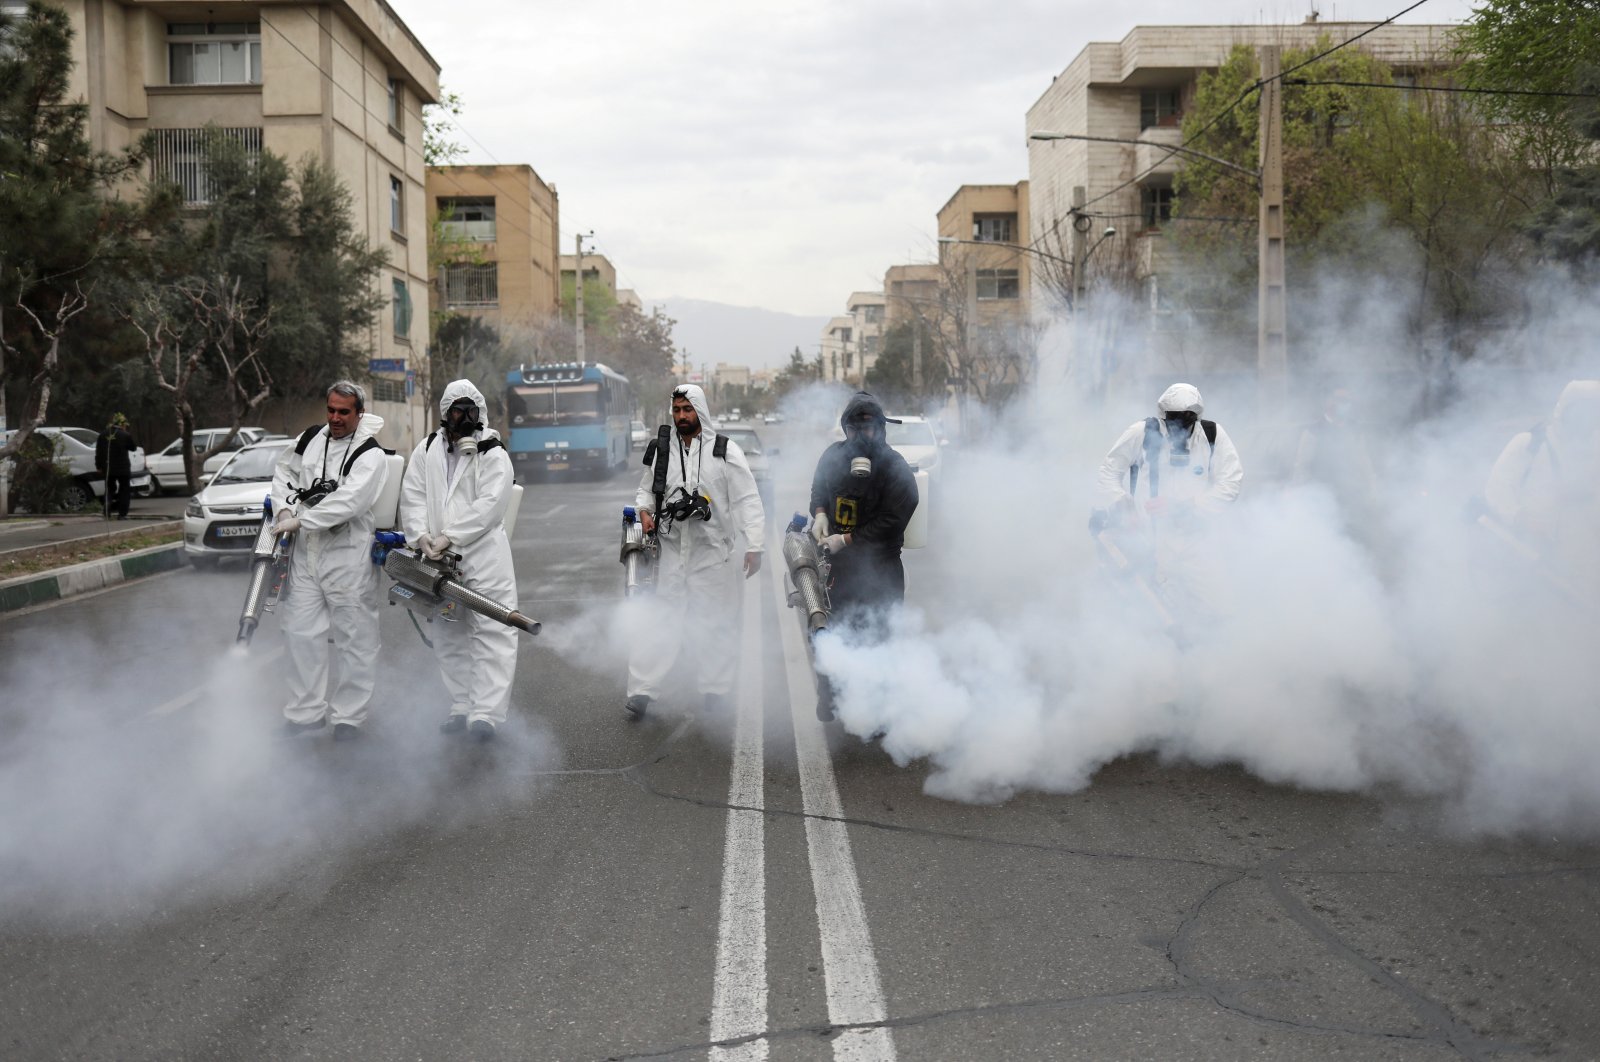 Members of firefighters wear protective face masks as they disinfect the streets, Tehran, March 18, 2020. (REUTERS Photo)